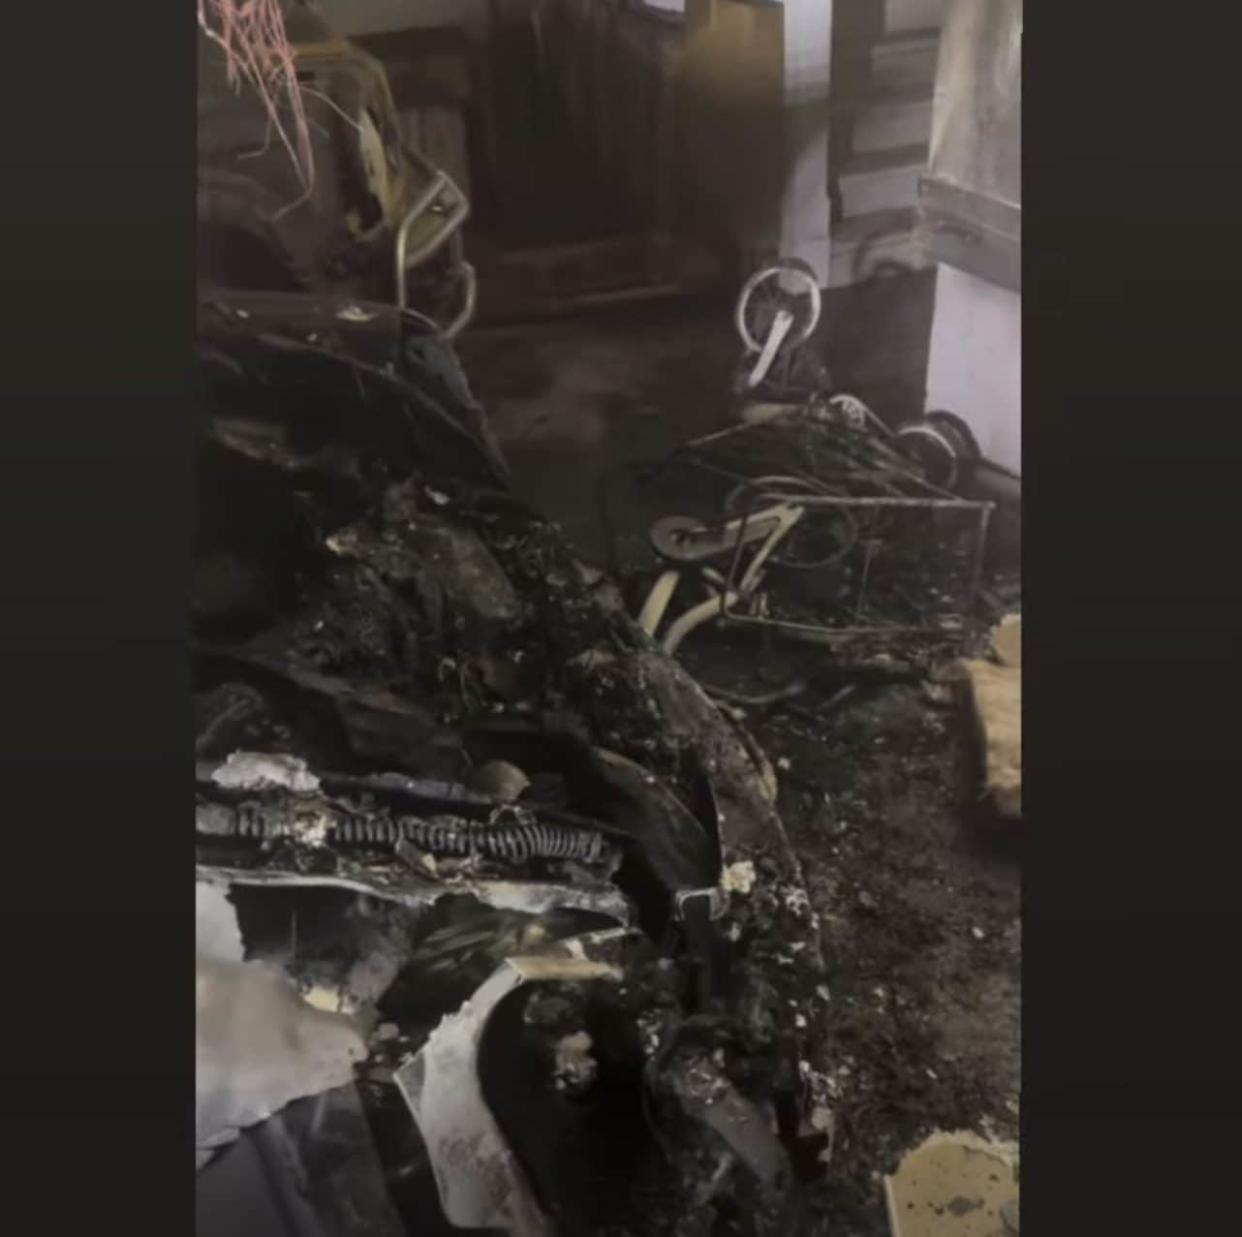 Aiyda Cobb shares a photo of the family garage, which shows soot-covered possessions